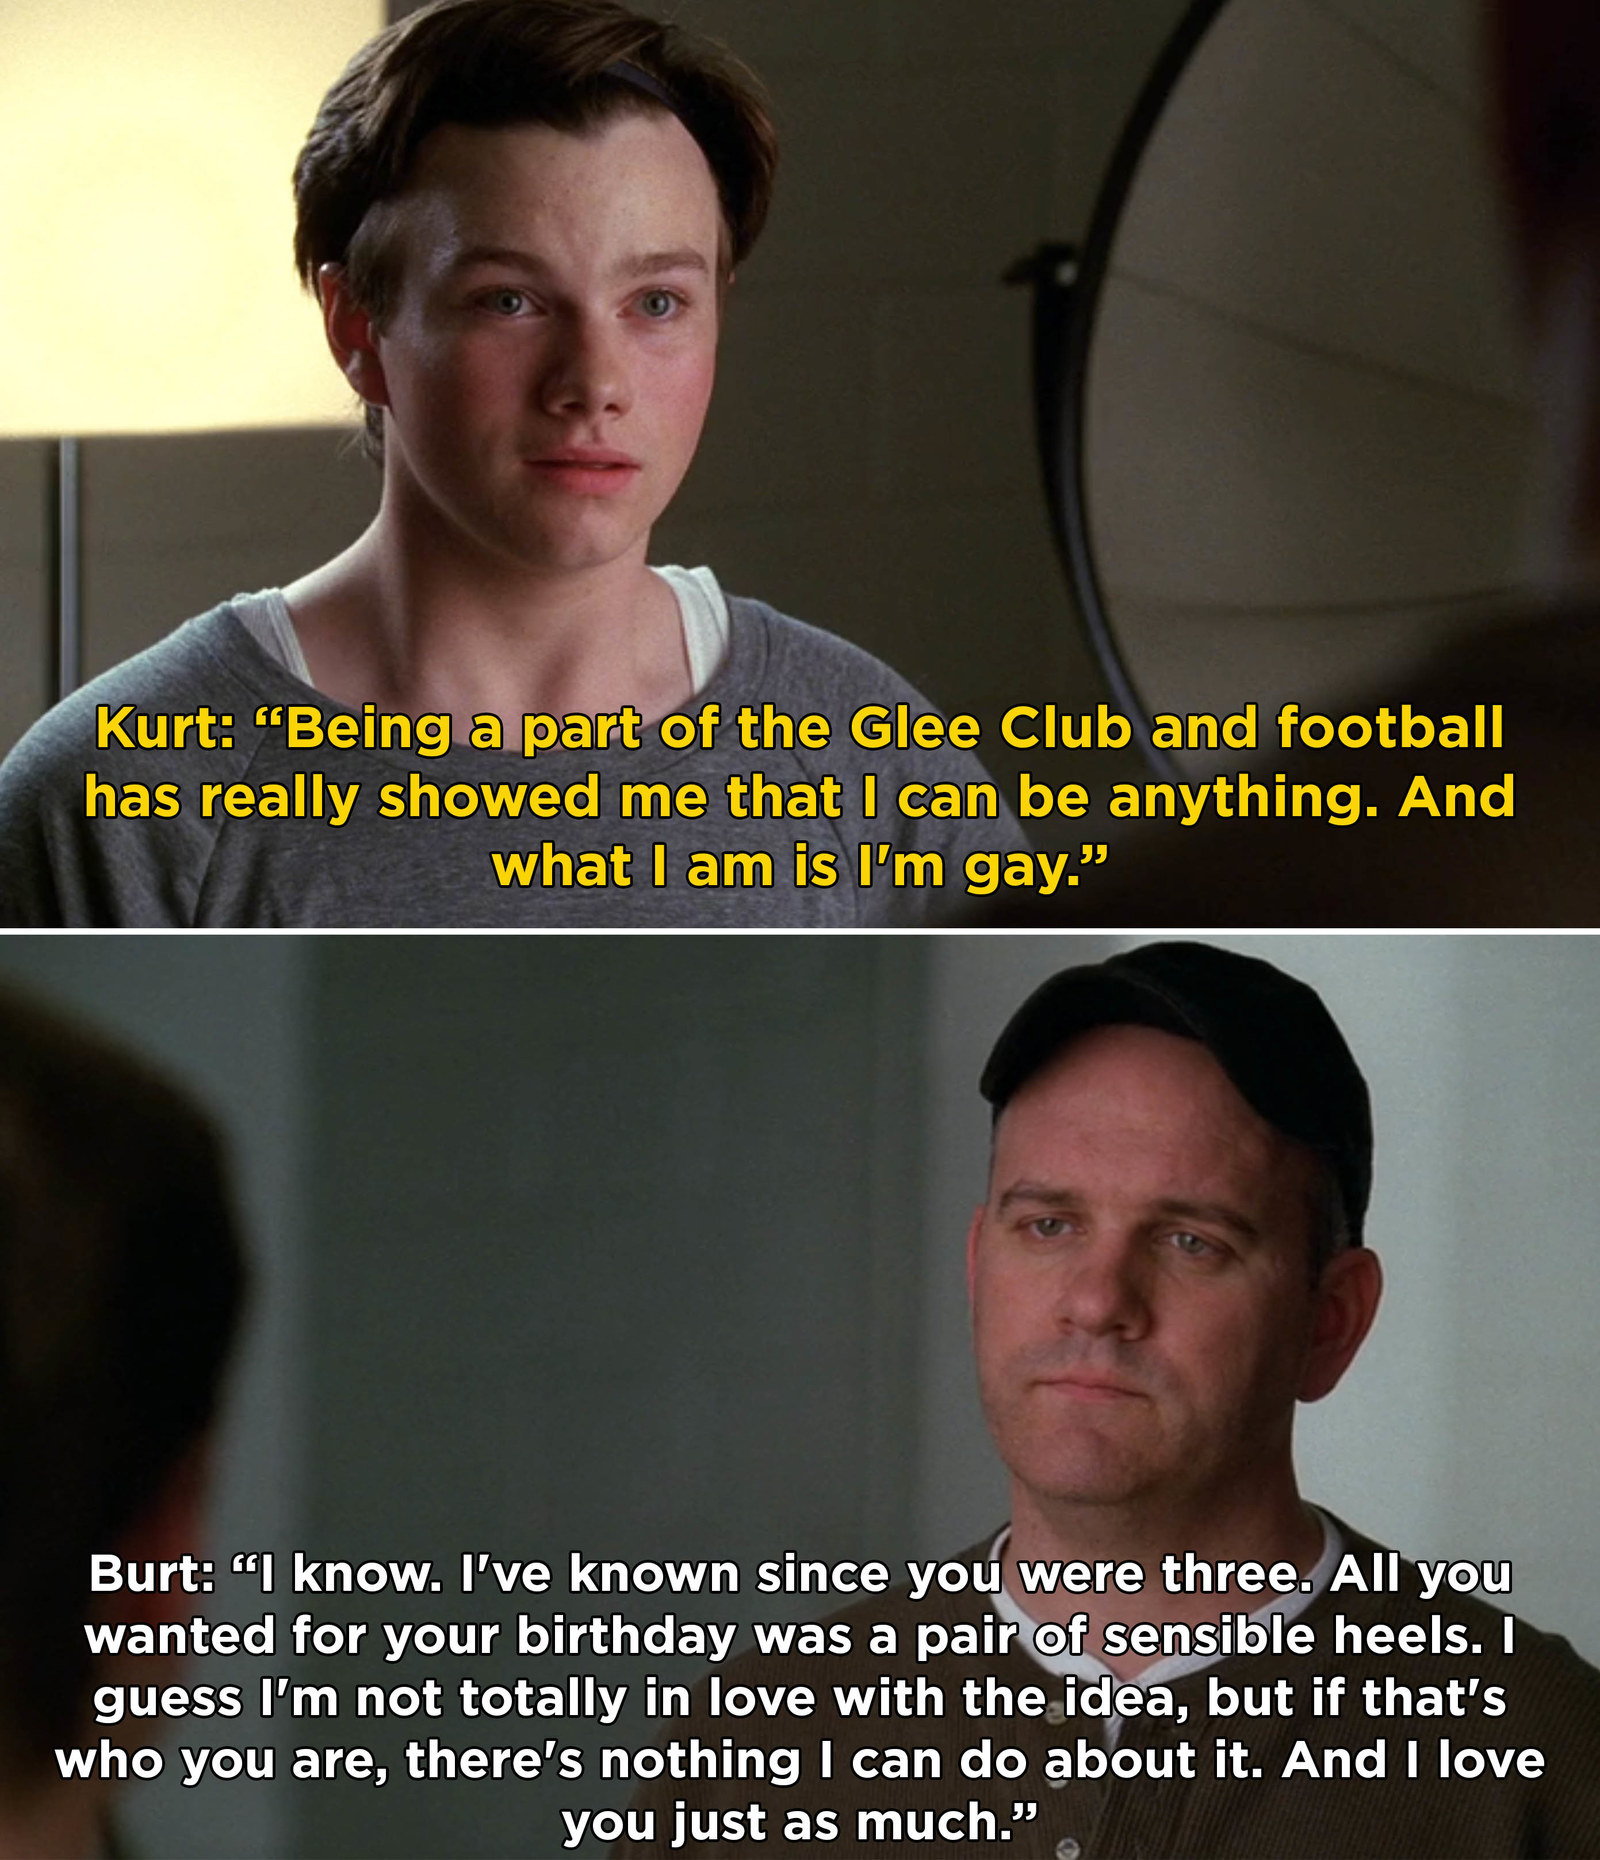 Kurt tells his dad he&#x27;s gay, Burt says he&#x27;s known since Kurt was three and loves him just as much